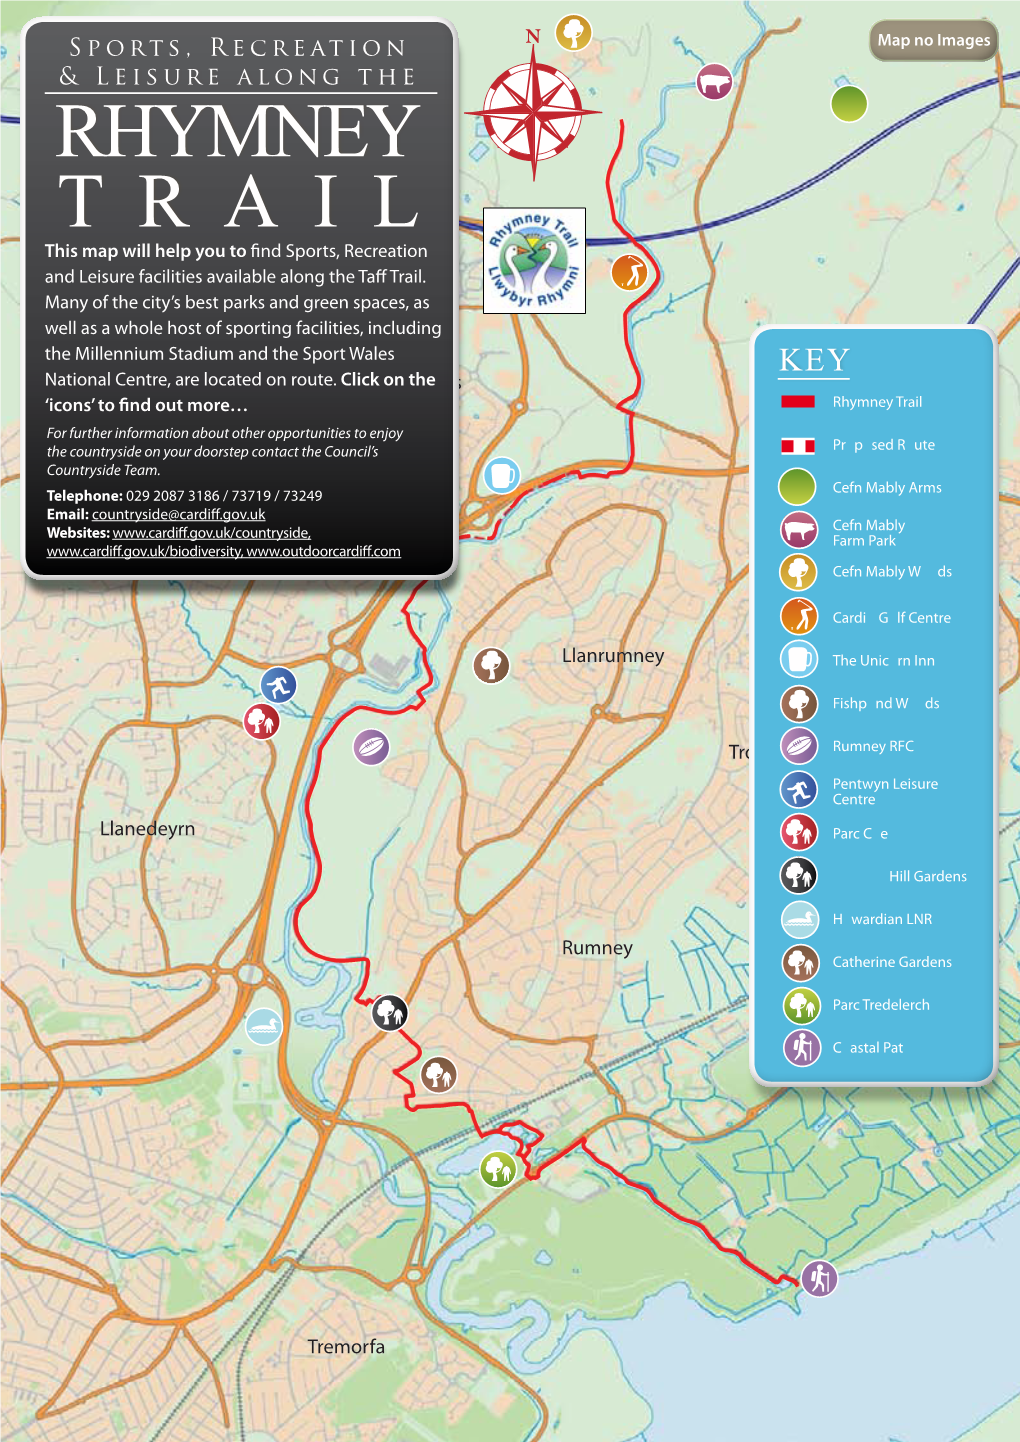 Sports, Recreation and Leisure Along the Rhymney Trail